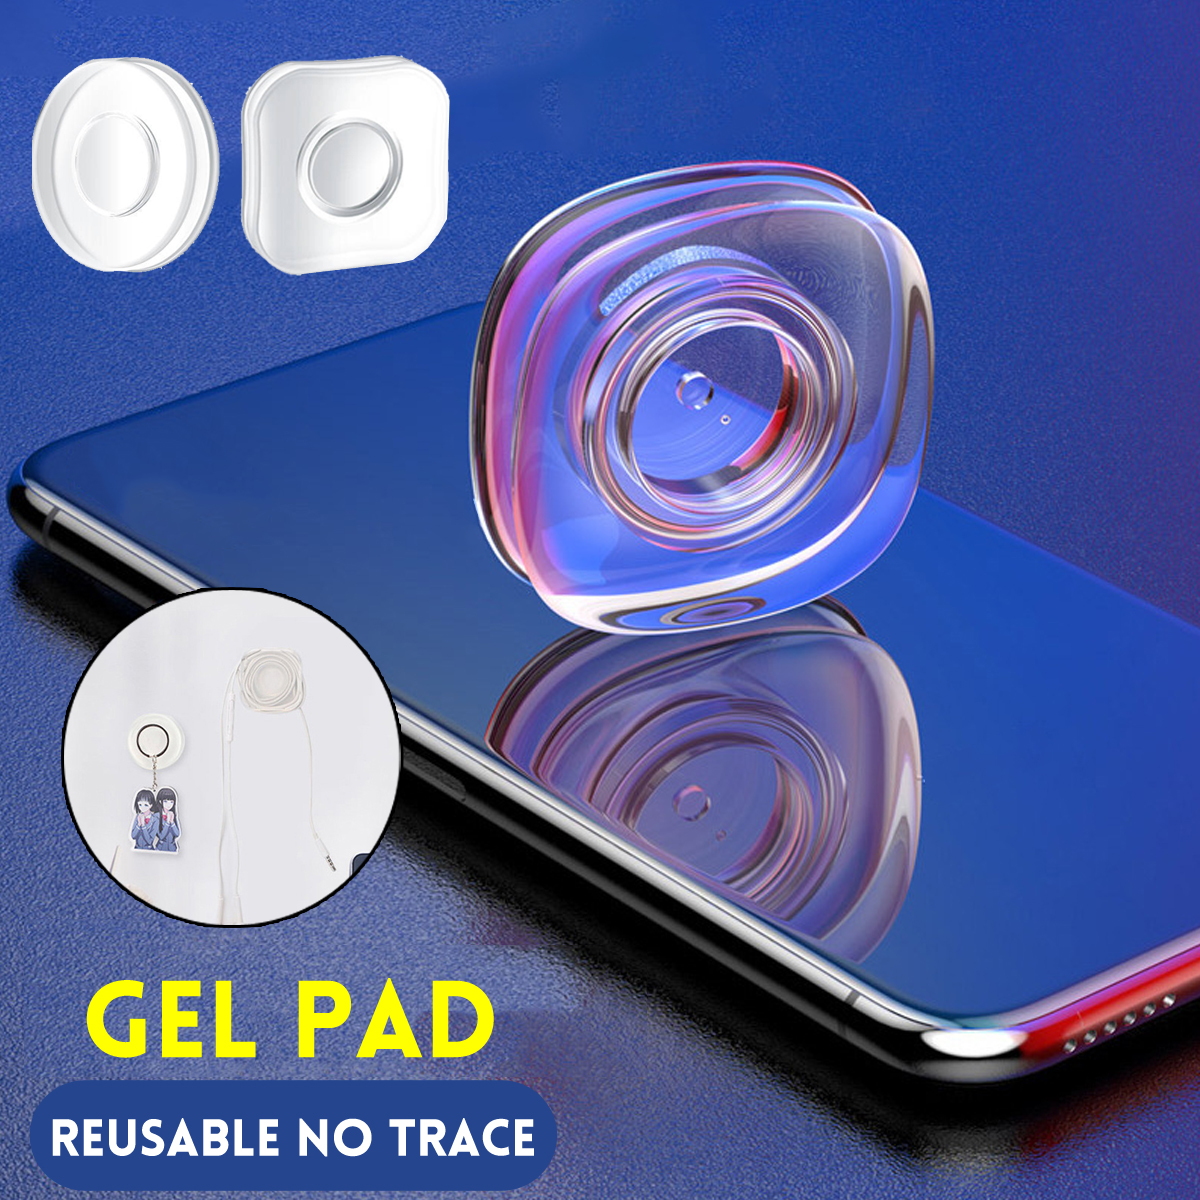 Reusable Gel Pad Magic Sticker Washable Traceless Casual Paste Pad Phone Holder